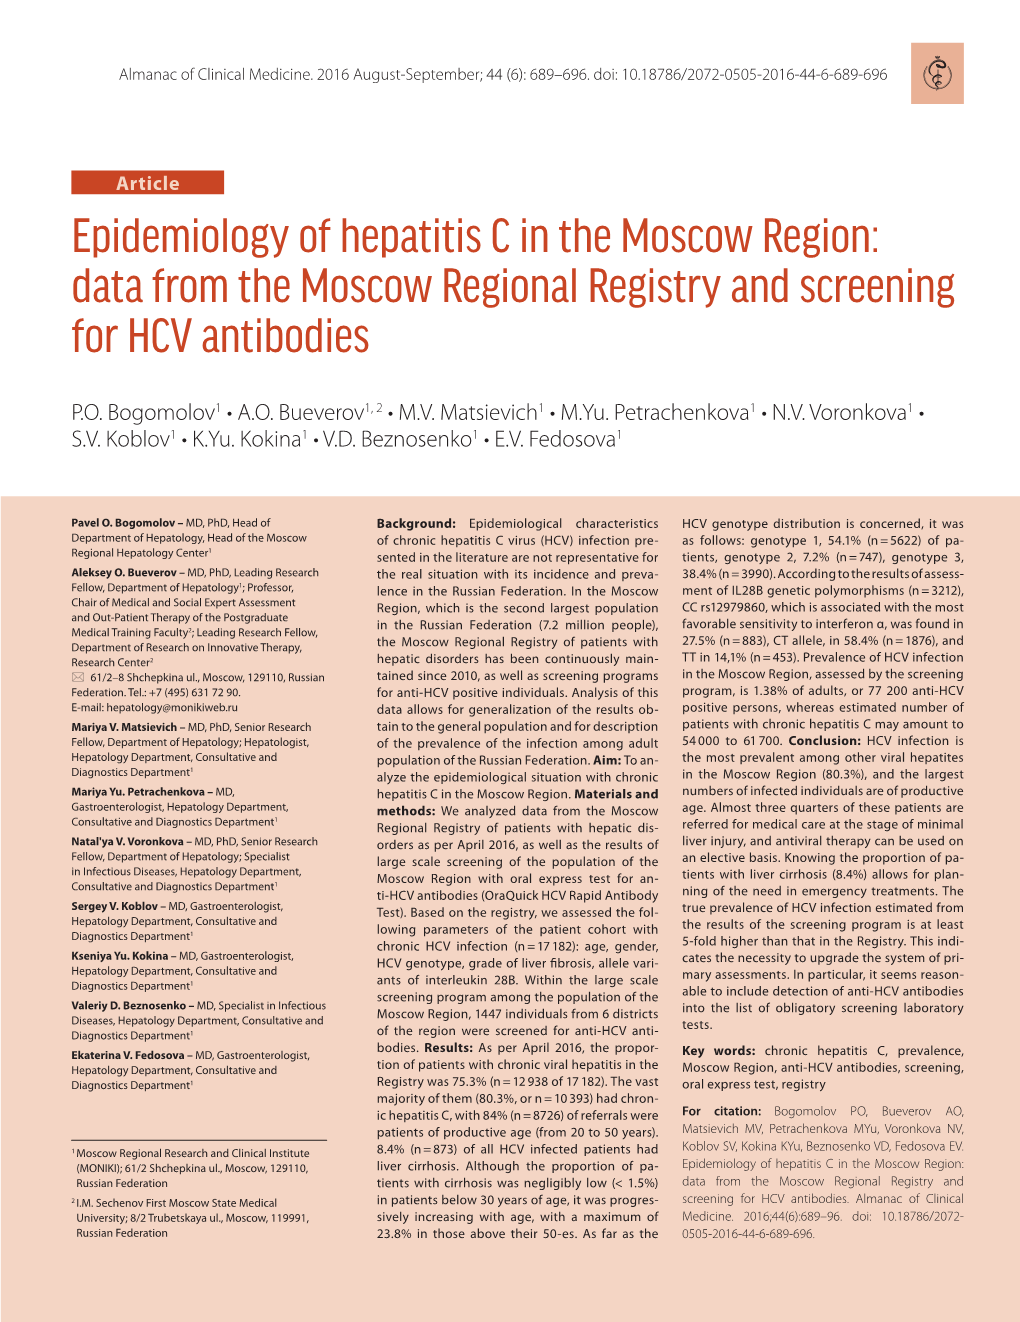 Epidemiology of Hepatitis C in the Moscow Region: Data from the Moscow Regional Registry and Screening for HCV Antibodies